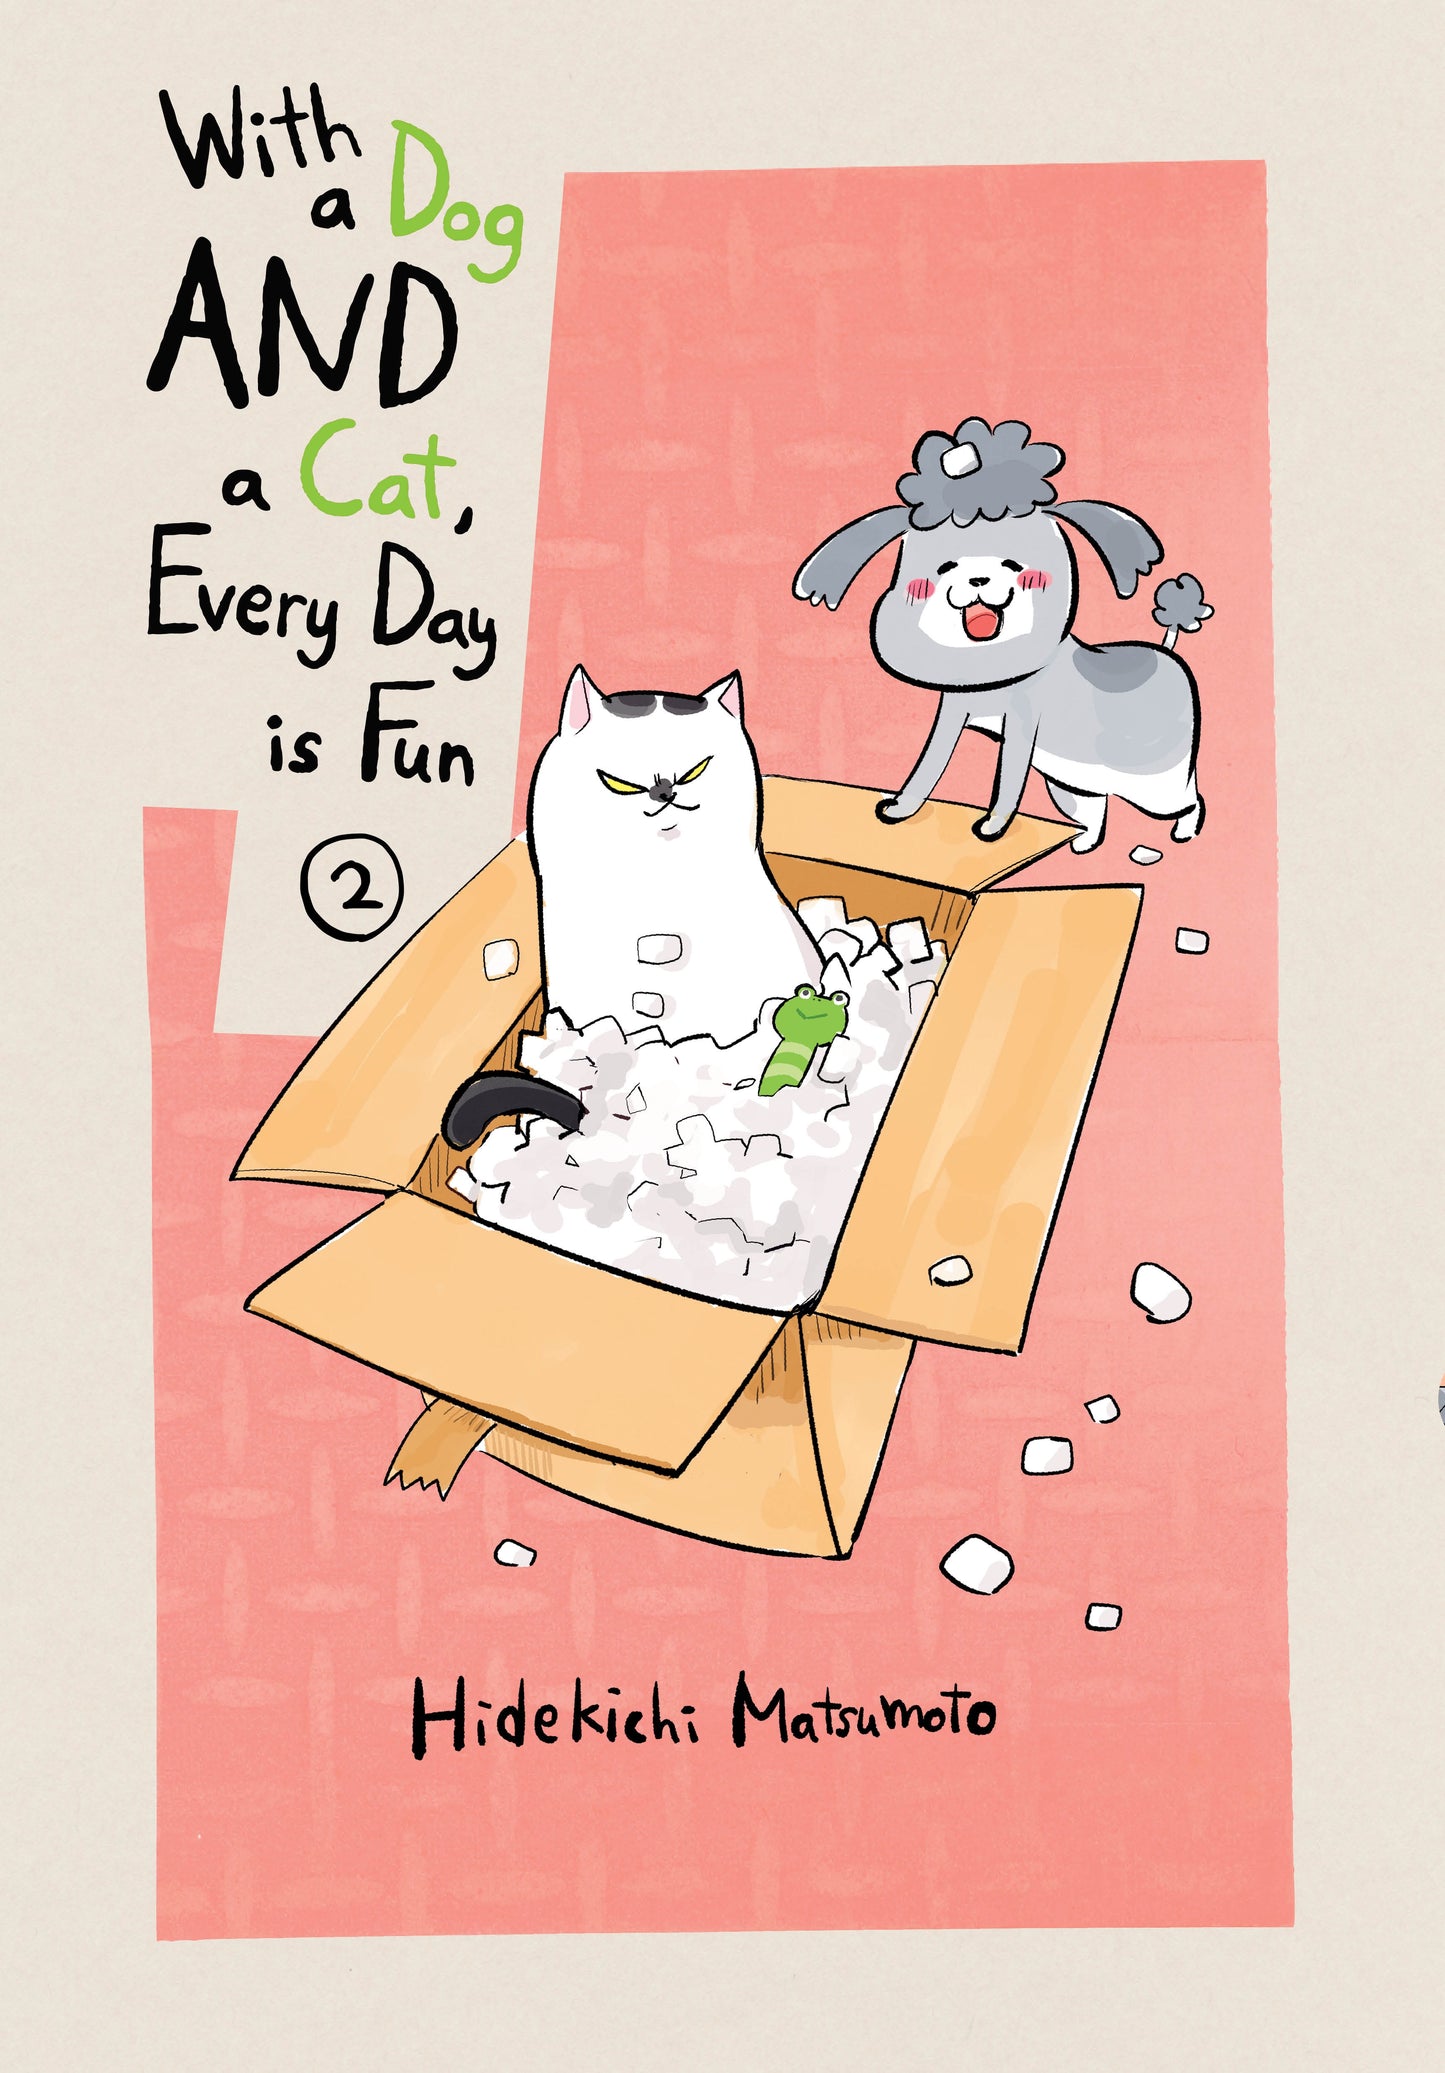 With a Dog AND a Cat, Every Day is Fun, volume 2 - Manga Warehouse